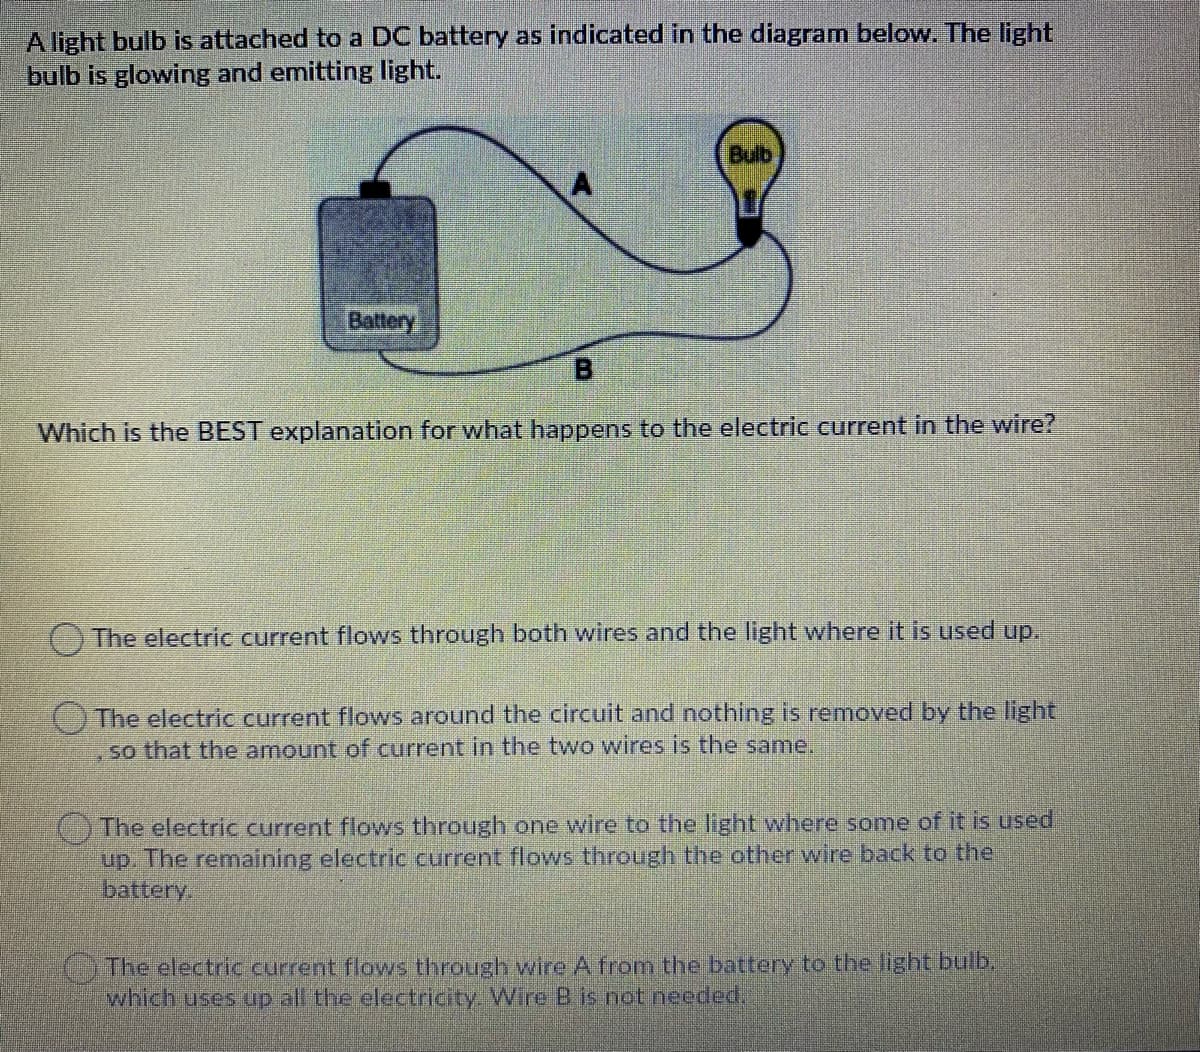 A light bulb is attached to a DC battery as indicated in the diagram below. The light
bulb is glowing and emitting light.
Bulb
Battery
B.
Which is the BEST explanation for what happens to the electric current in the wire?
The electric current flows through both wires and the light where it is used up.
The electric current flows around the circuit and nothing is removed by the light
so that the amount of current in the two wires is the same.
The electric current flows through one wire to the light where some of it is used
up. The remaining electric current flows through the other wire back to the
battery.
OThe electric current flows through wire A from the battery to the light bulb
which uses up all the electricity. Wire B is not needed,
